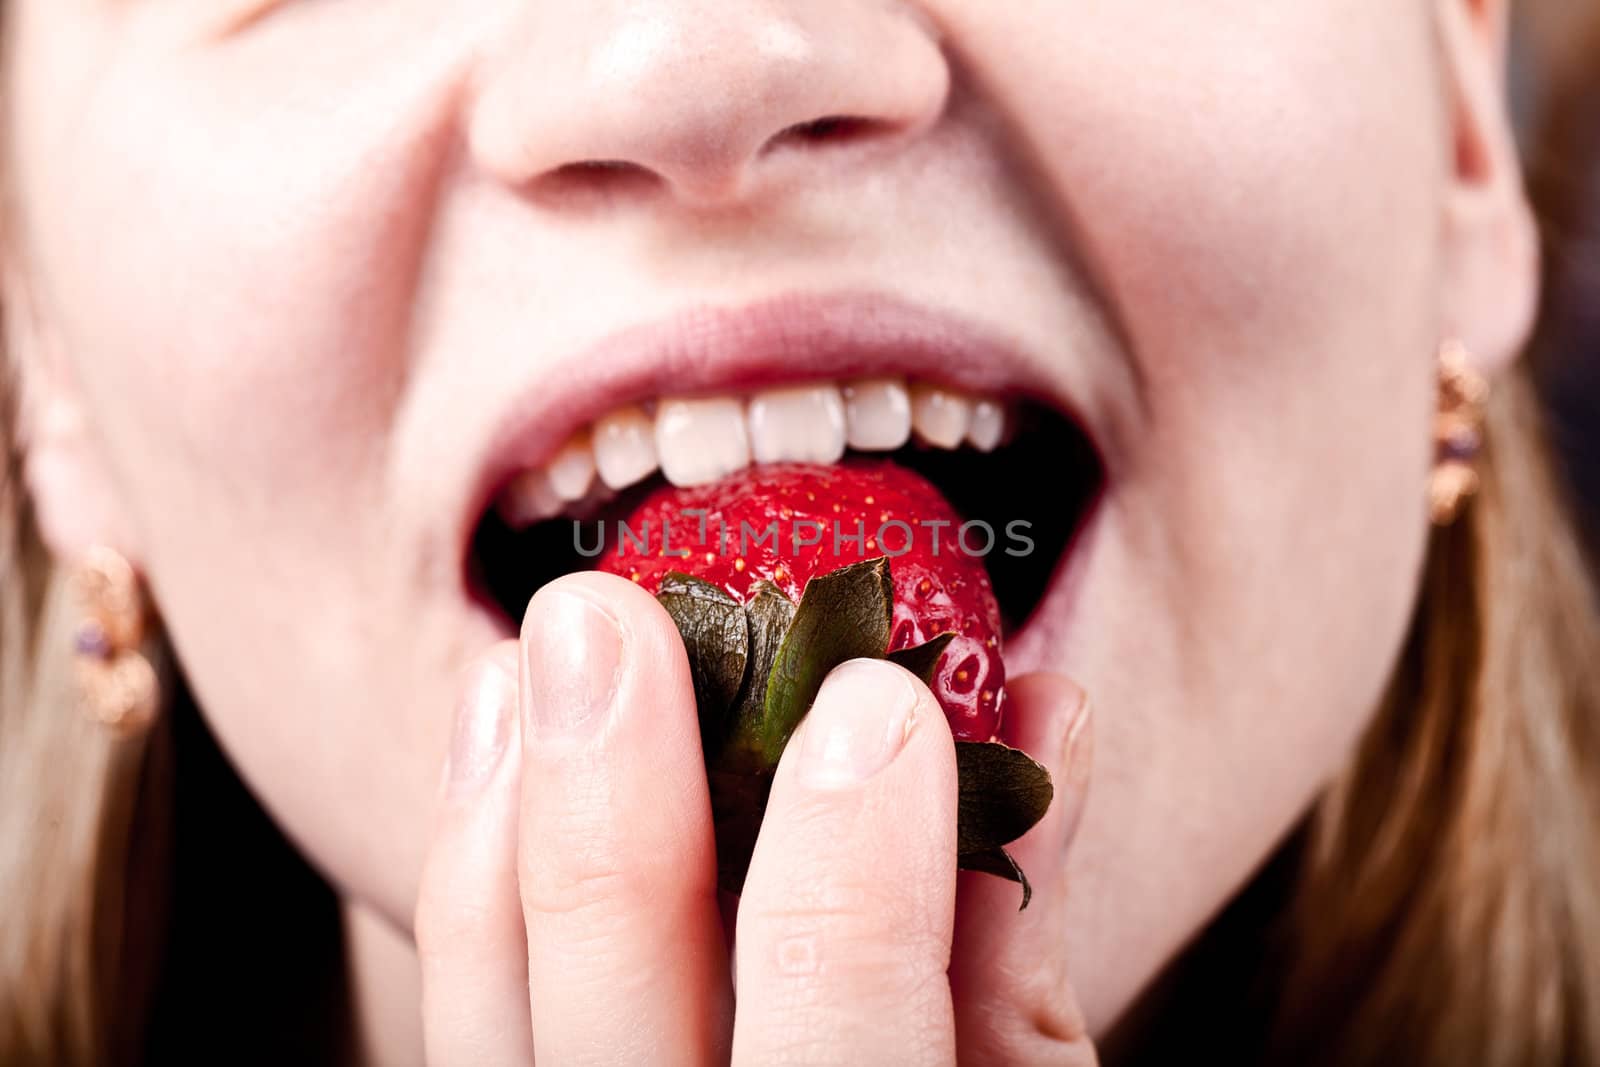 Young woman eating fresh juicy strawberry